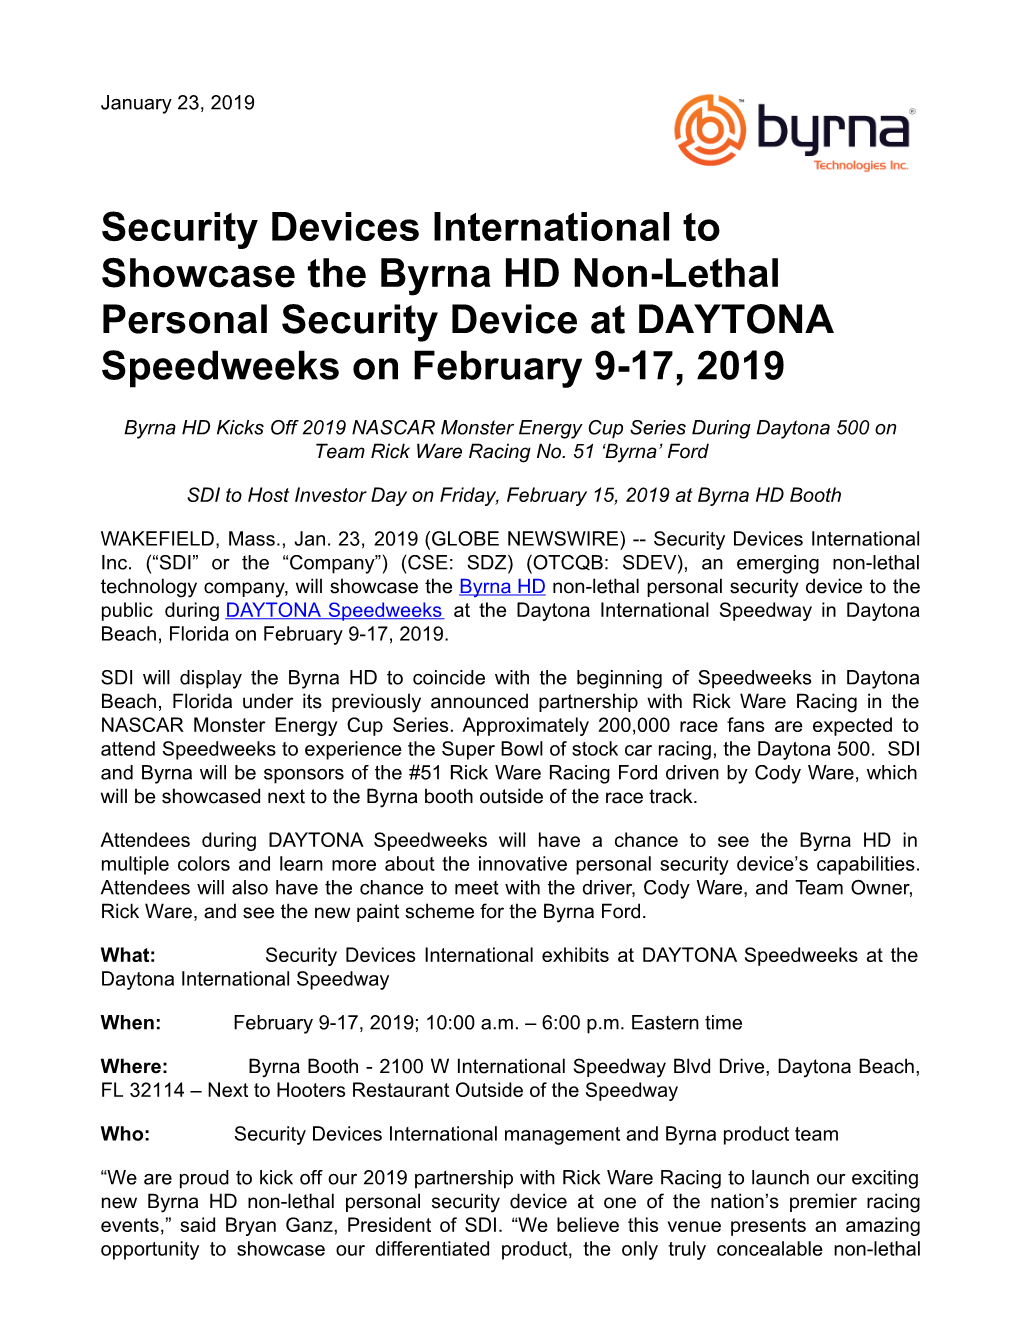 Security Devices International to Showcase the Byrna HD Non-Lethal Personal Security Device at DAYTONA Speedweeks on February 9-17, 2019